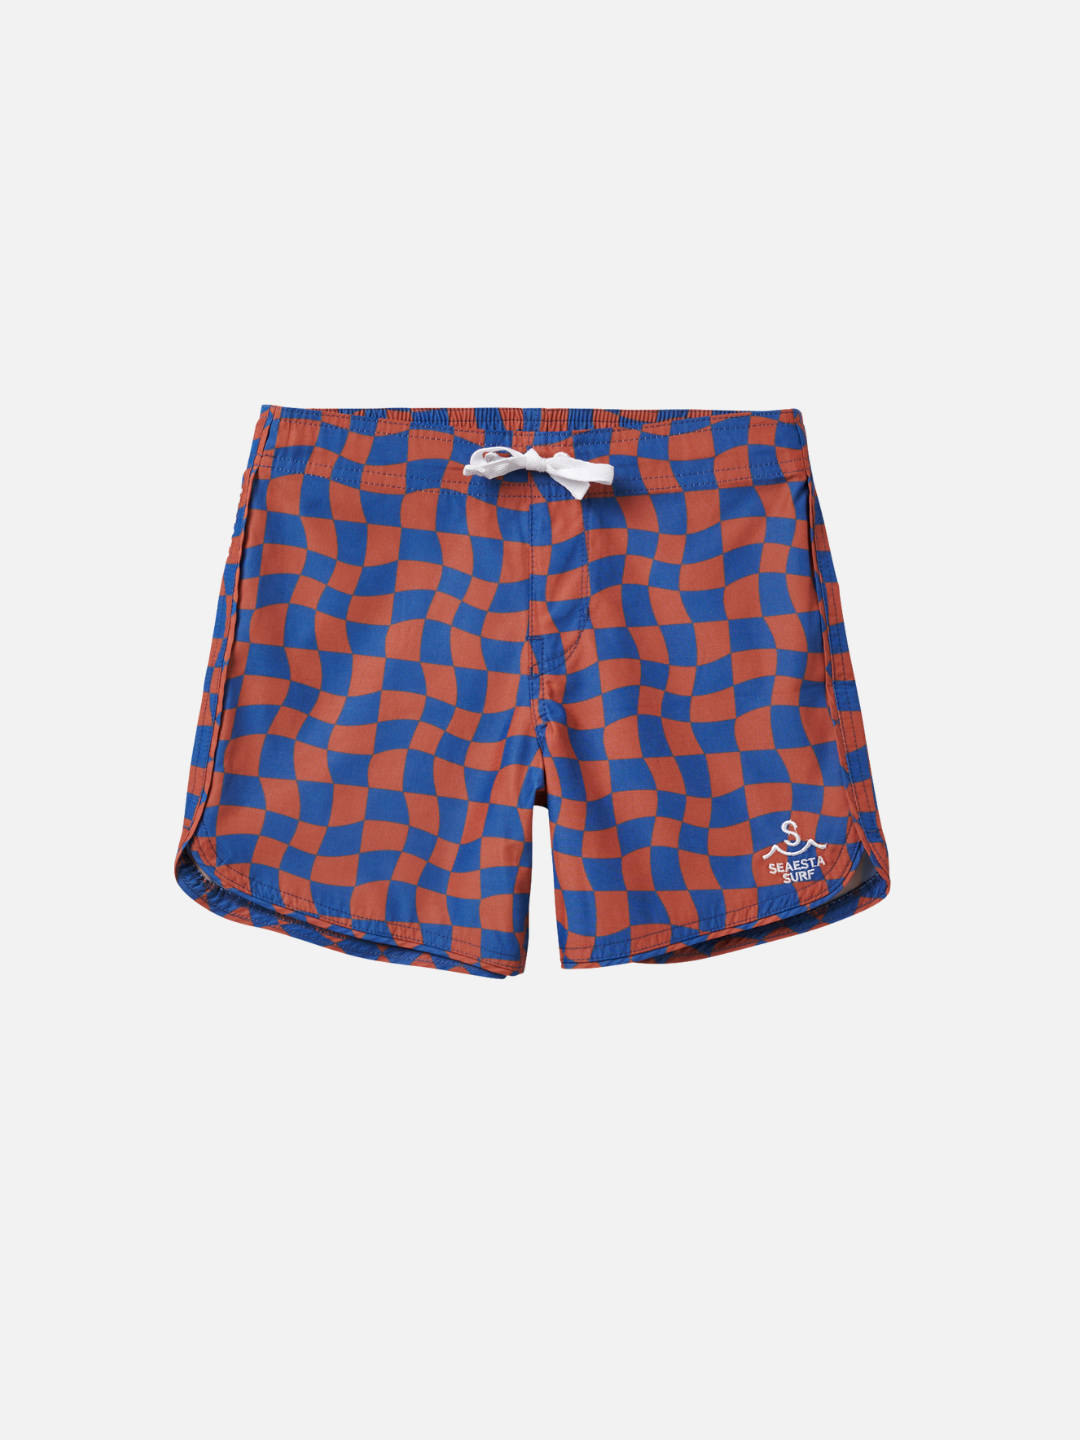 A front view of kid's Wavy Checks Boardshort. The image displays a front tie and Saesta Surf logo on the left side. 